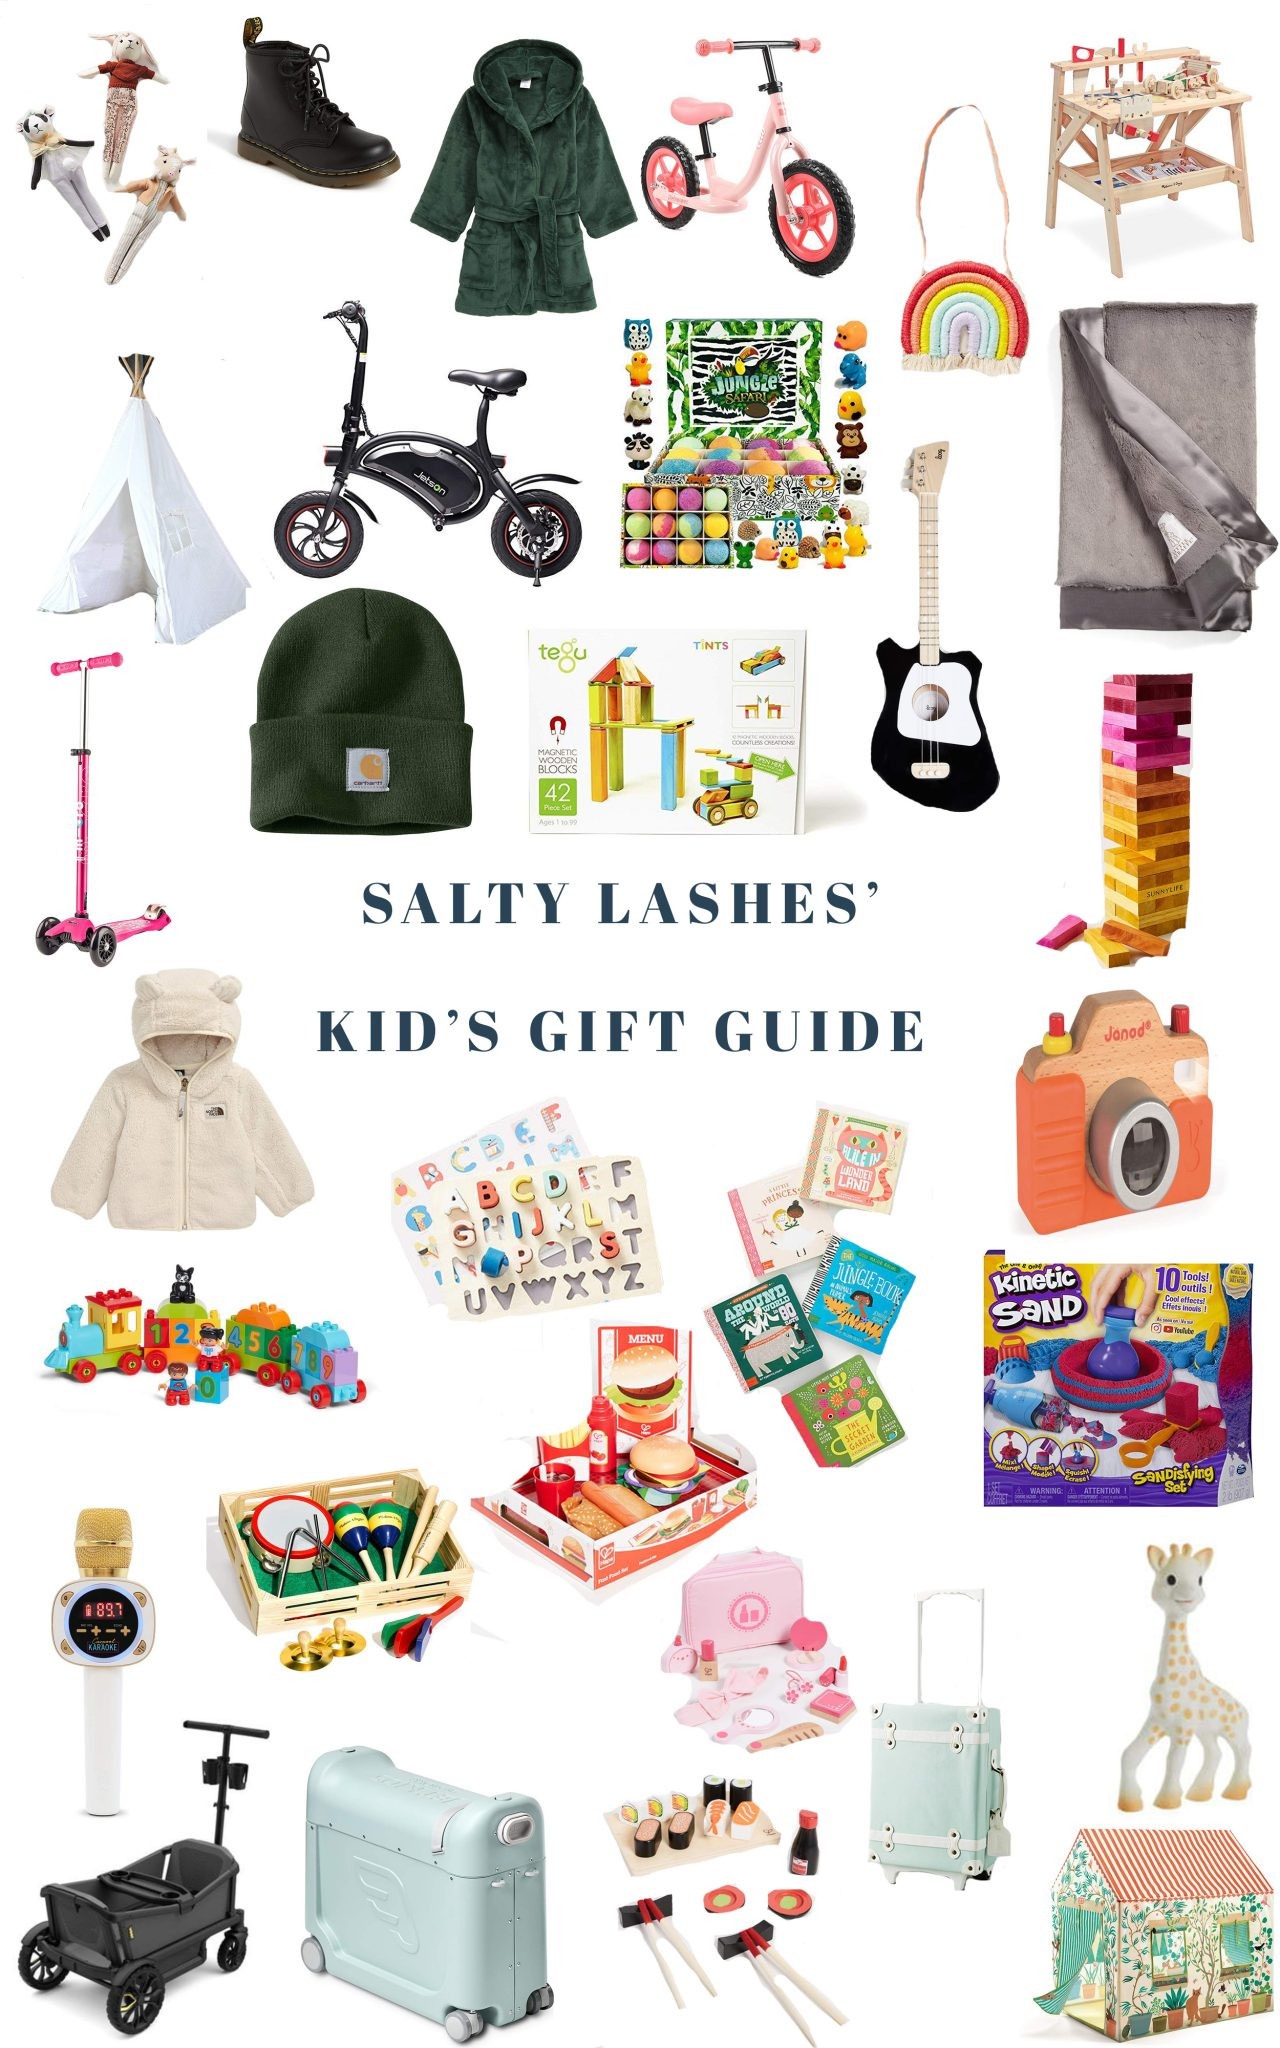 Gift Guide 2020 Kids
 Kids Holiday Gift Guide 2019